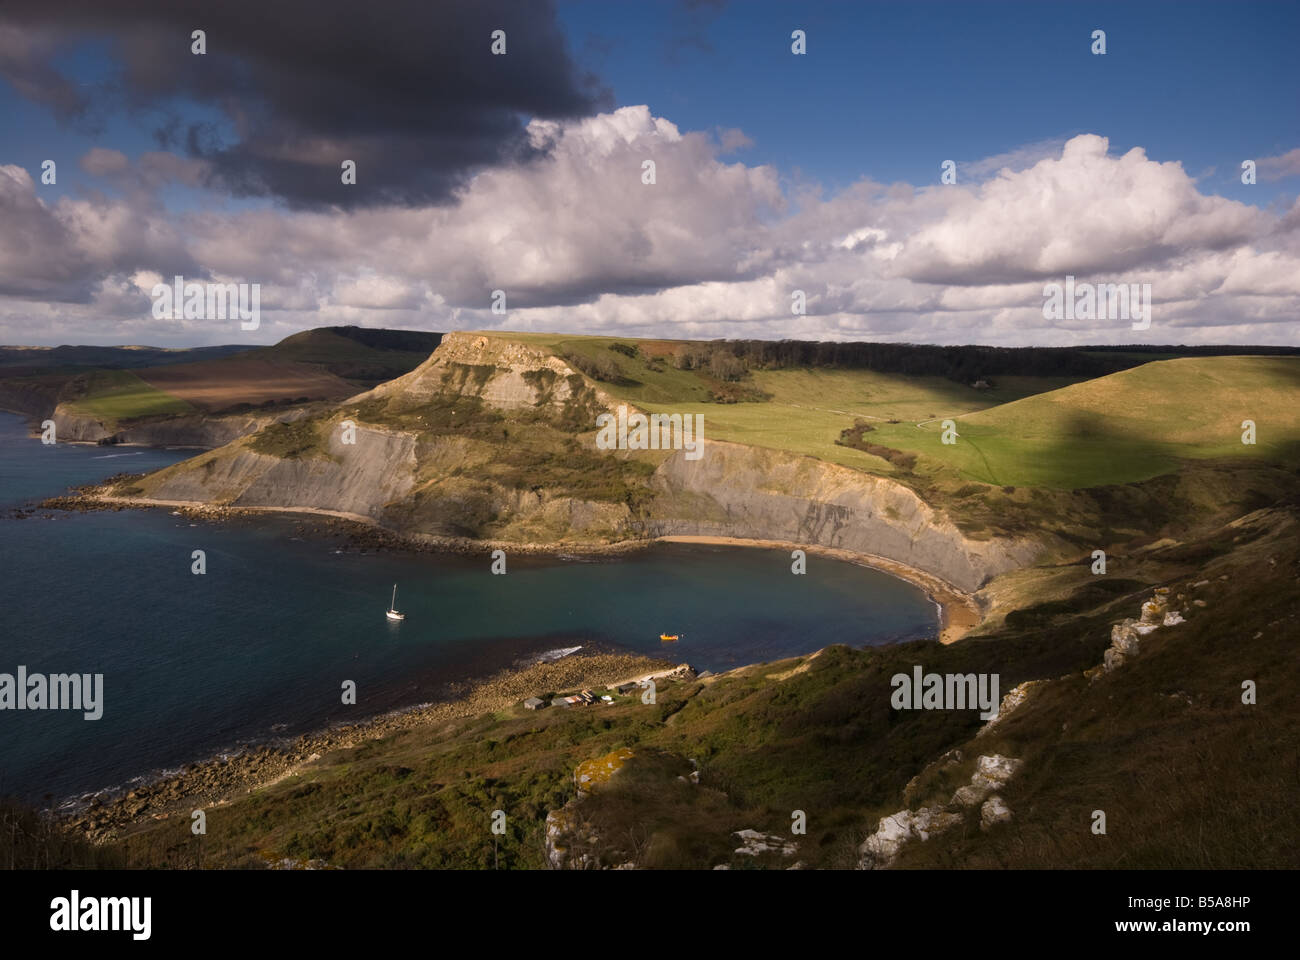 Chapman s Pool Isle of Purbeck Dorset Viewed from the South West Coast path along St Alban s Head Stock Photo